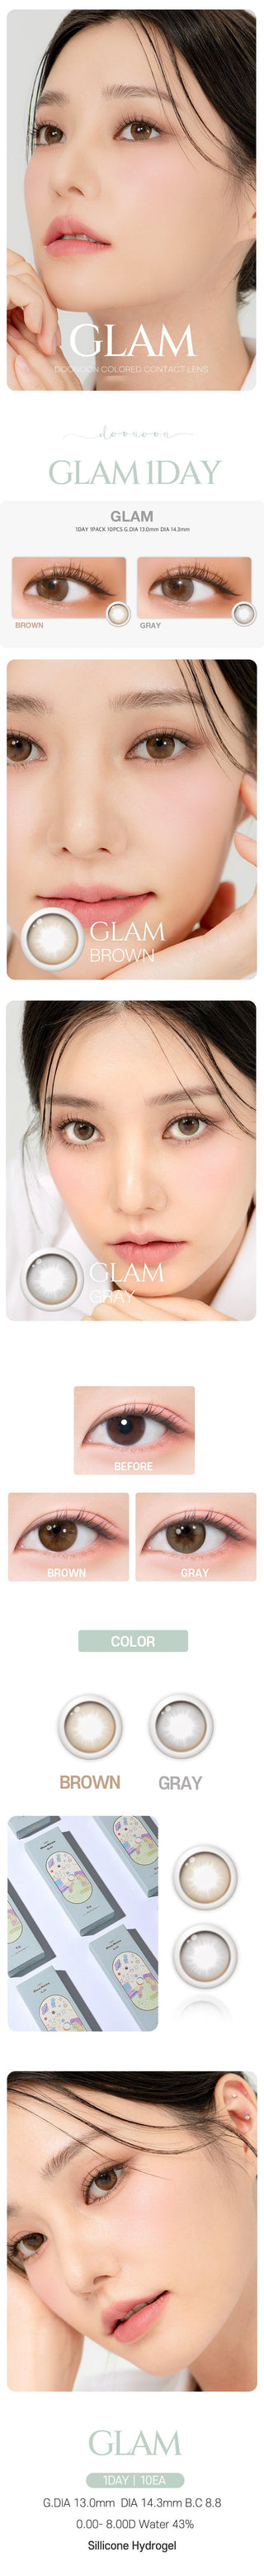 Variety of DooNoon Glam 1-Day Brown (10pk) contact lens colors displayed, with closeups of an eye wearing the contact lens colors, and with a model wearing the contact lens colors showing realistic eye-enlarging effect from various angles.